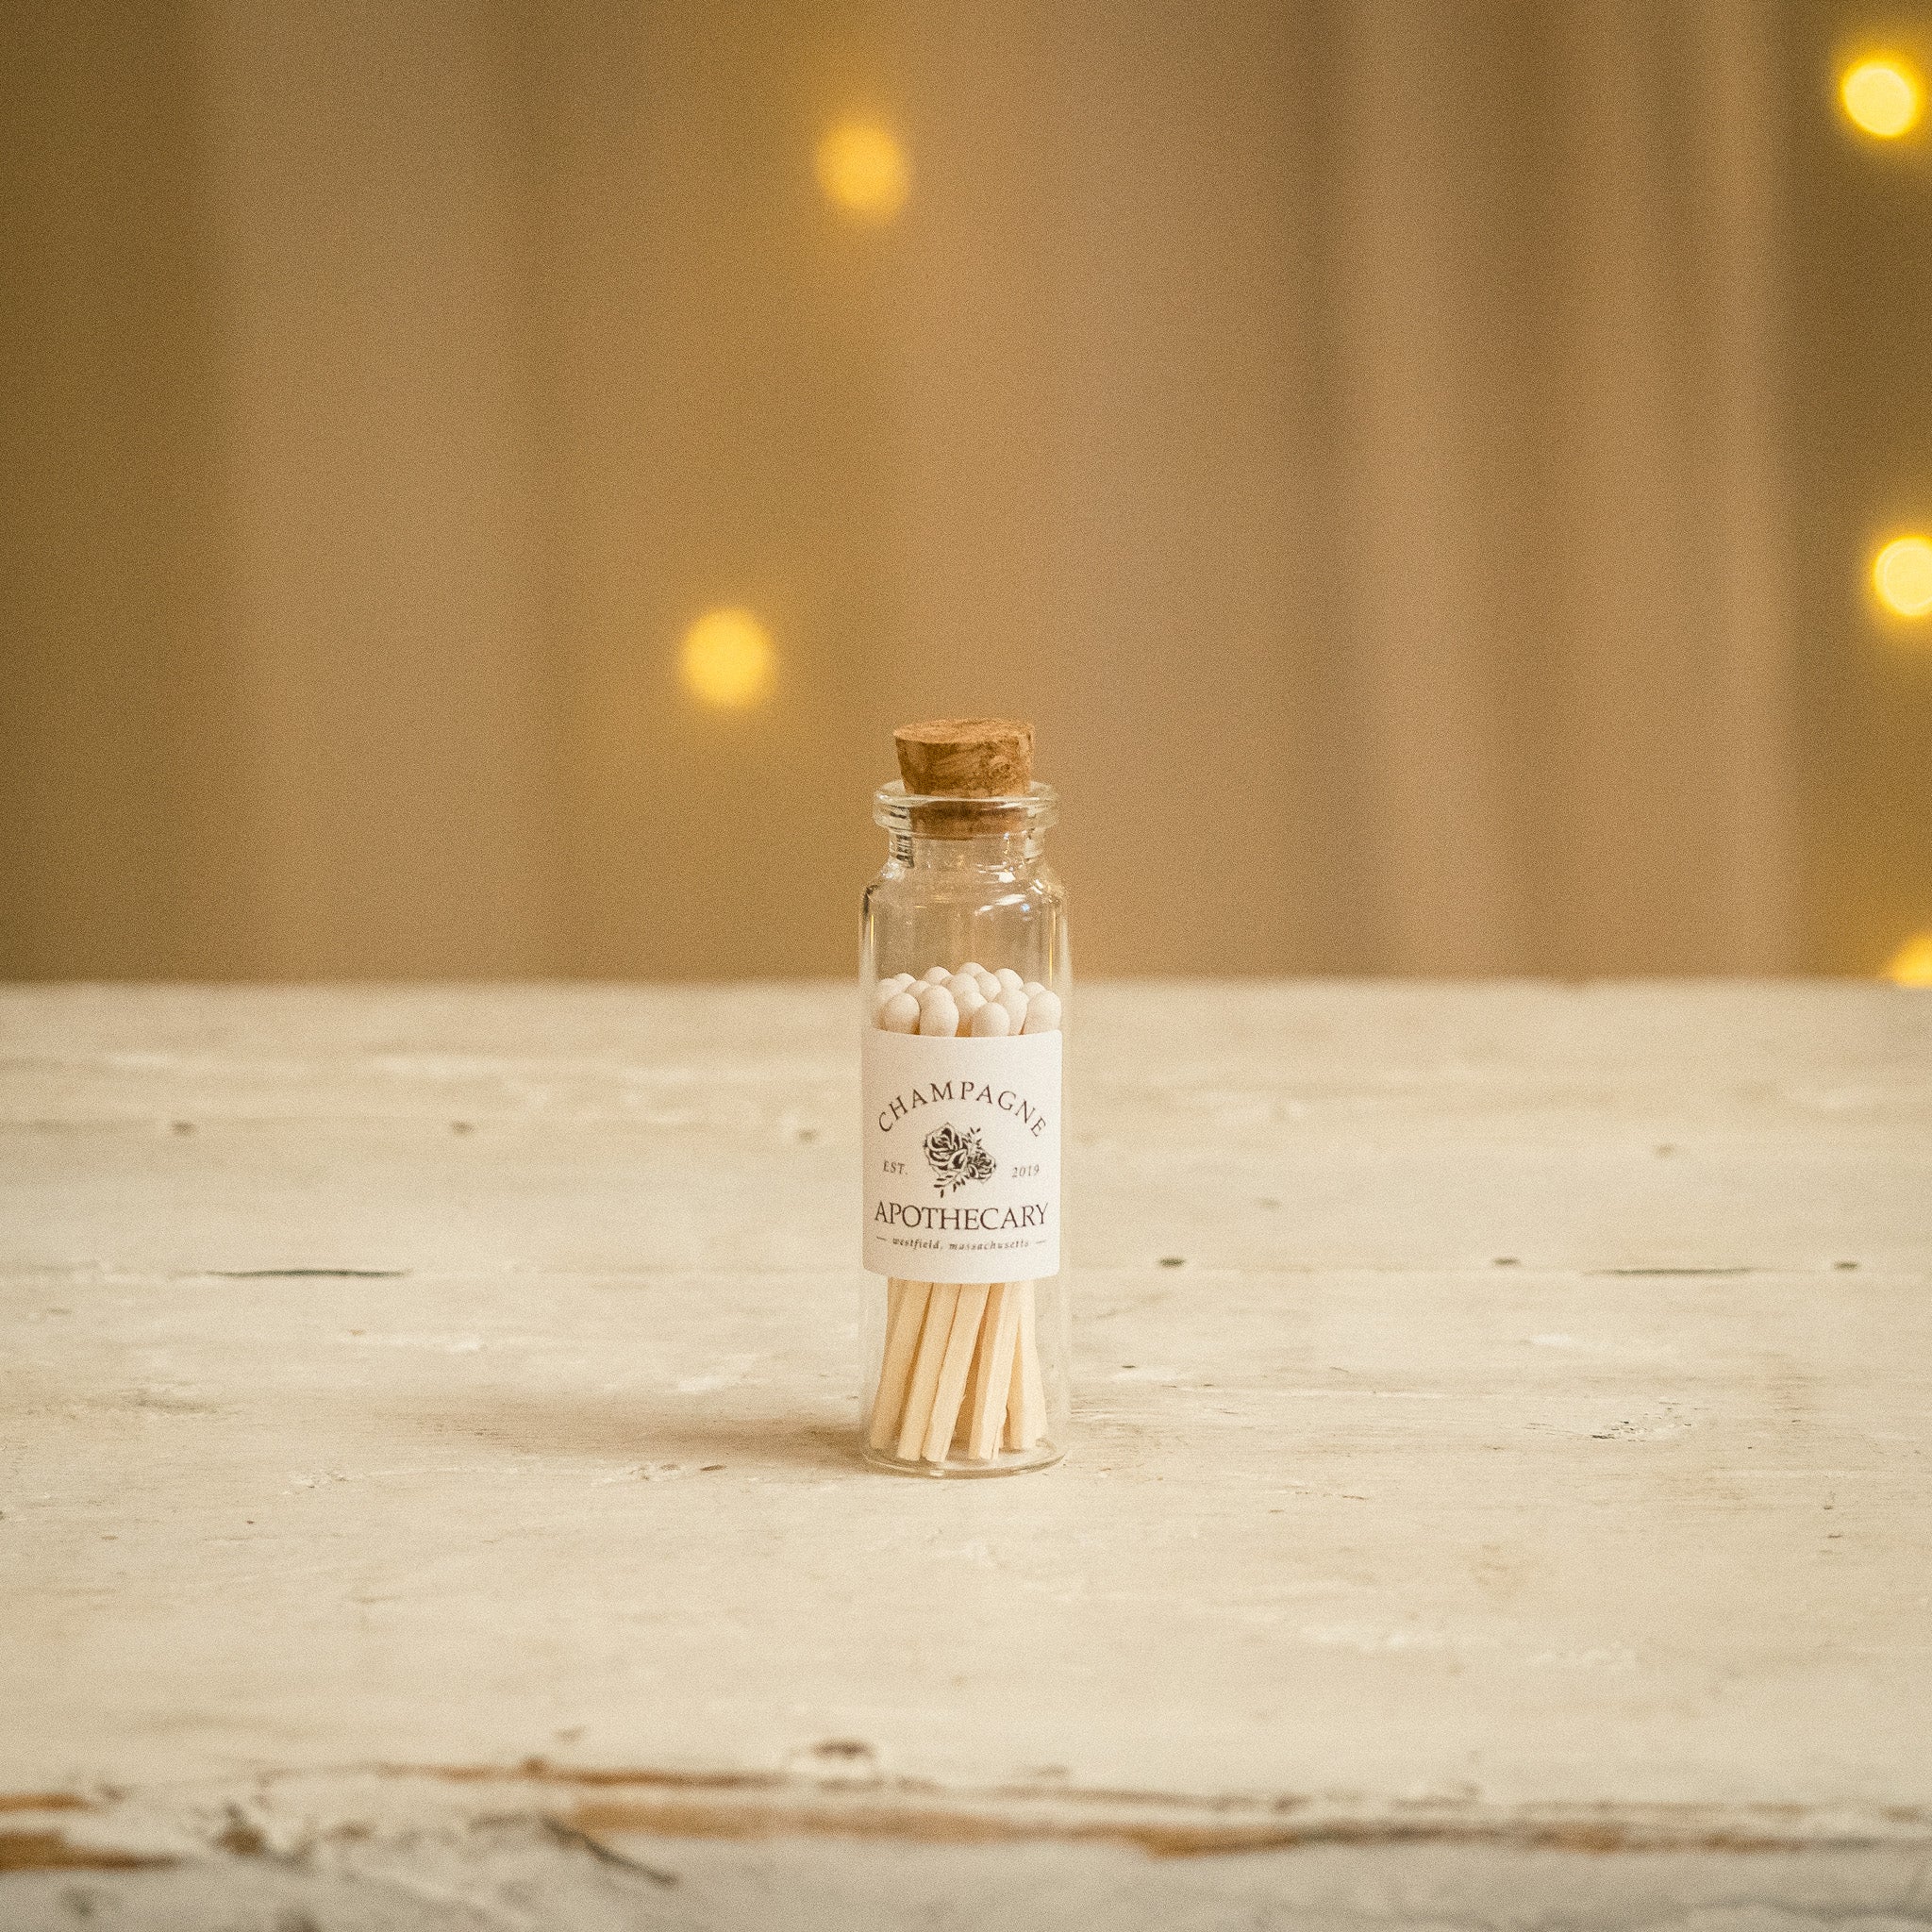 Our signature apothecary matches are a great way to light your favorite Champagne Apothecary 100% Soy Wax Candles! Super cute in their little apothecary bottle. 100% wood stick with a white tip.